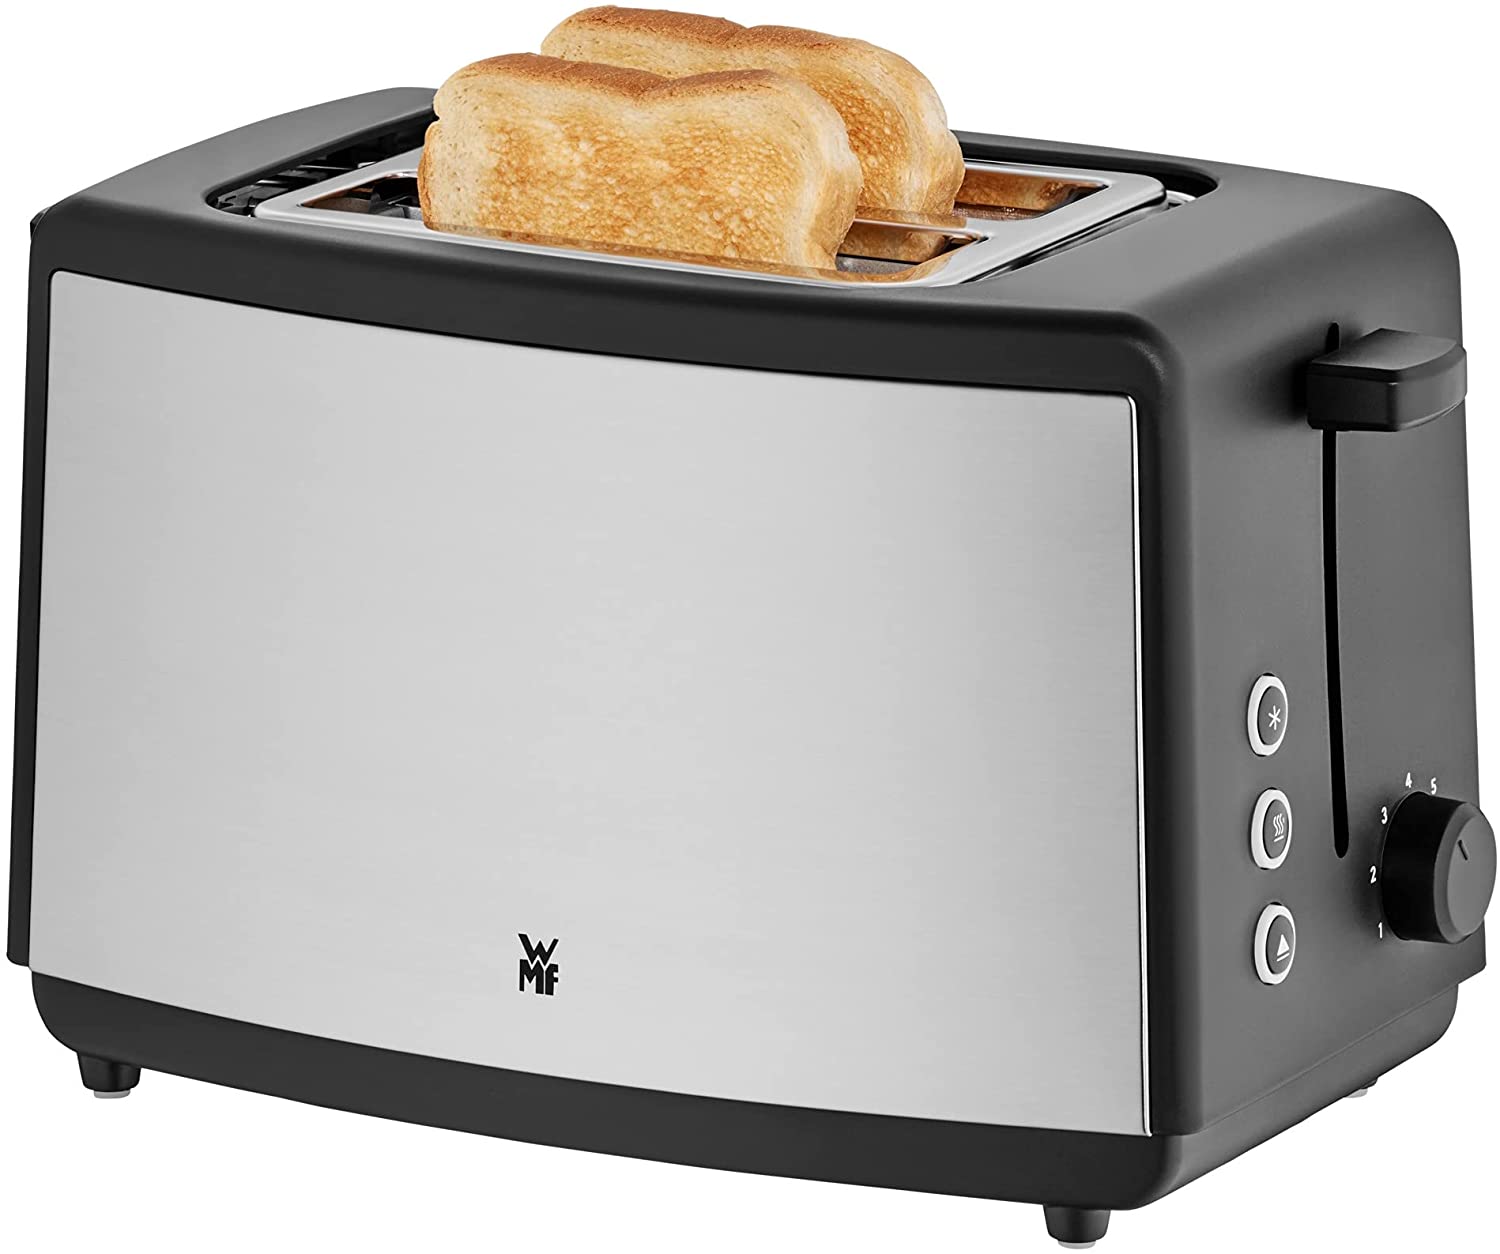 WMF Bueno Edition 800 W Toaster, Double Slot With Warming Rack and 7 Toasting Levels in Matte Stainless Steel